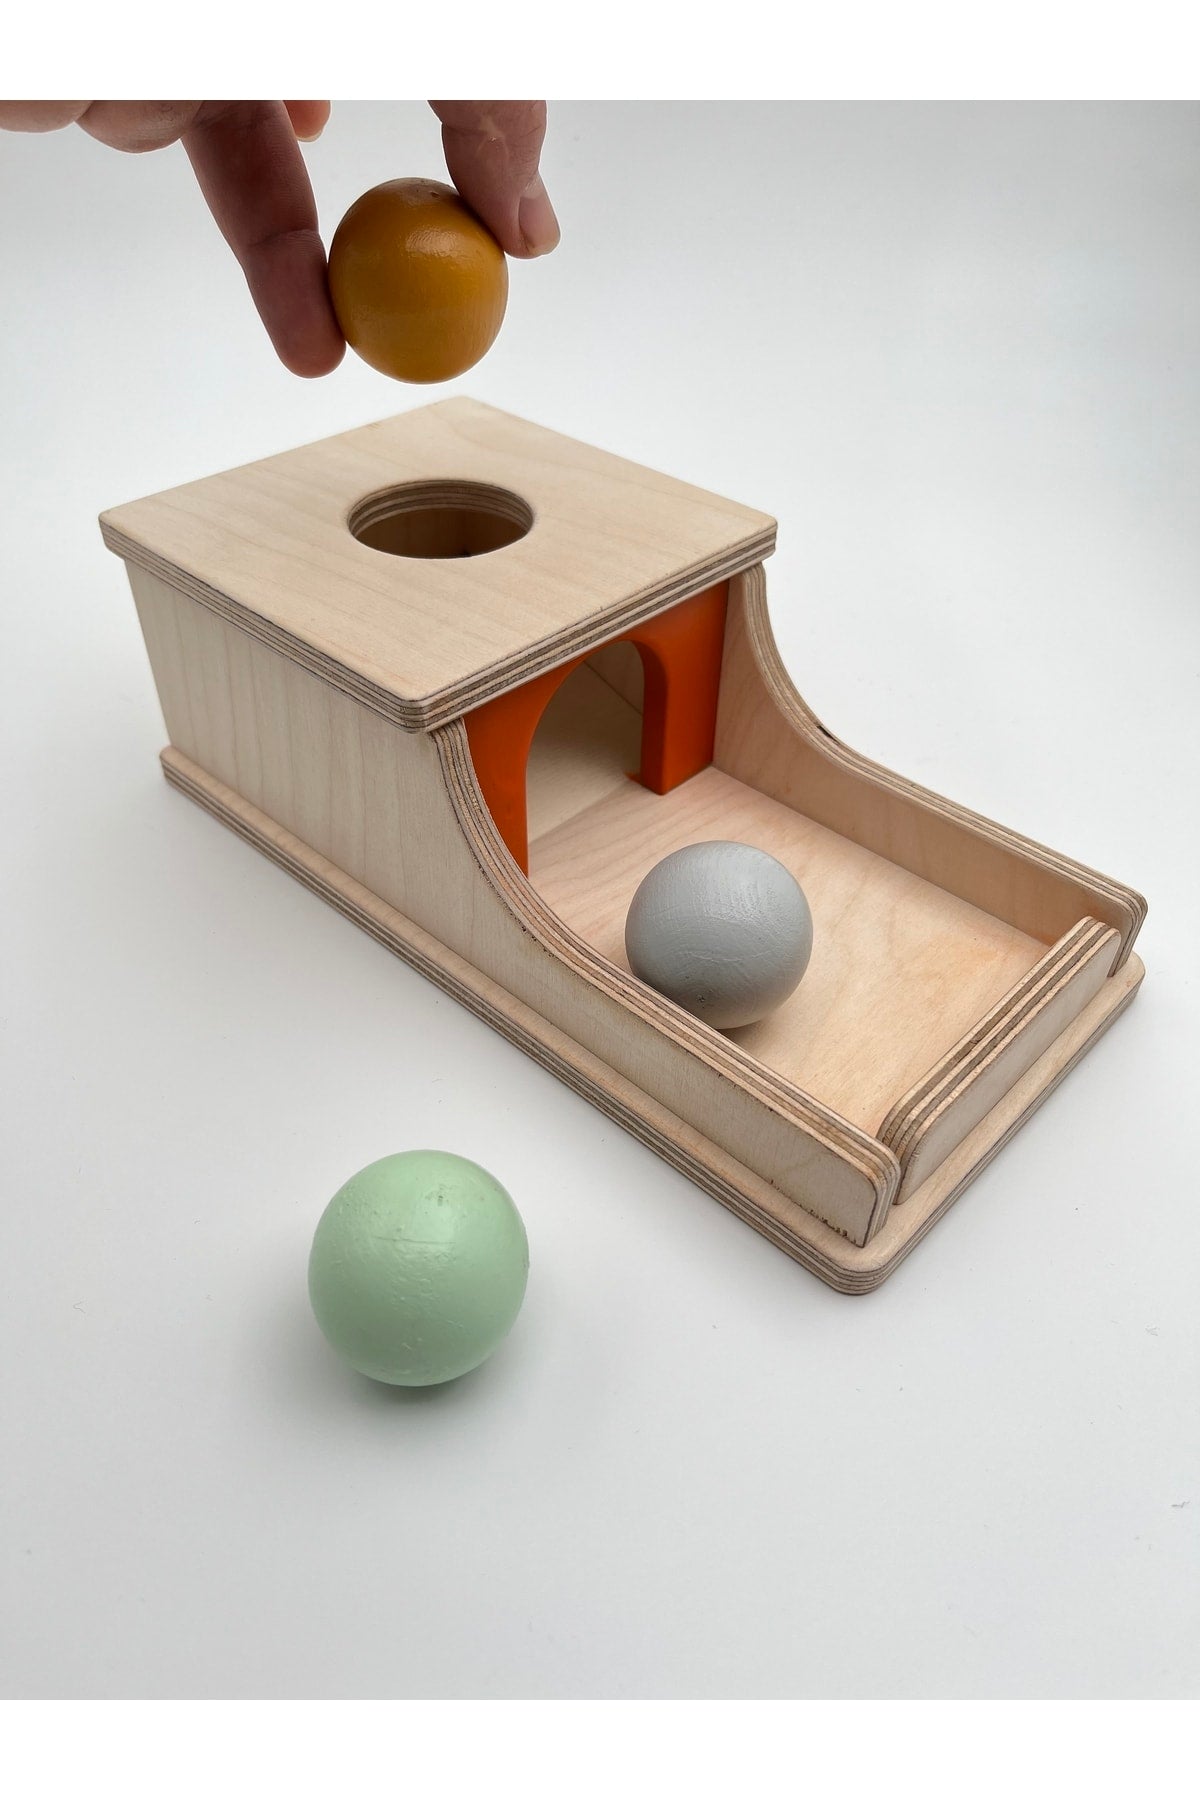 Montessori Continuity Box, Pastel Colored Balls, Educational Wooden Toy